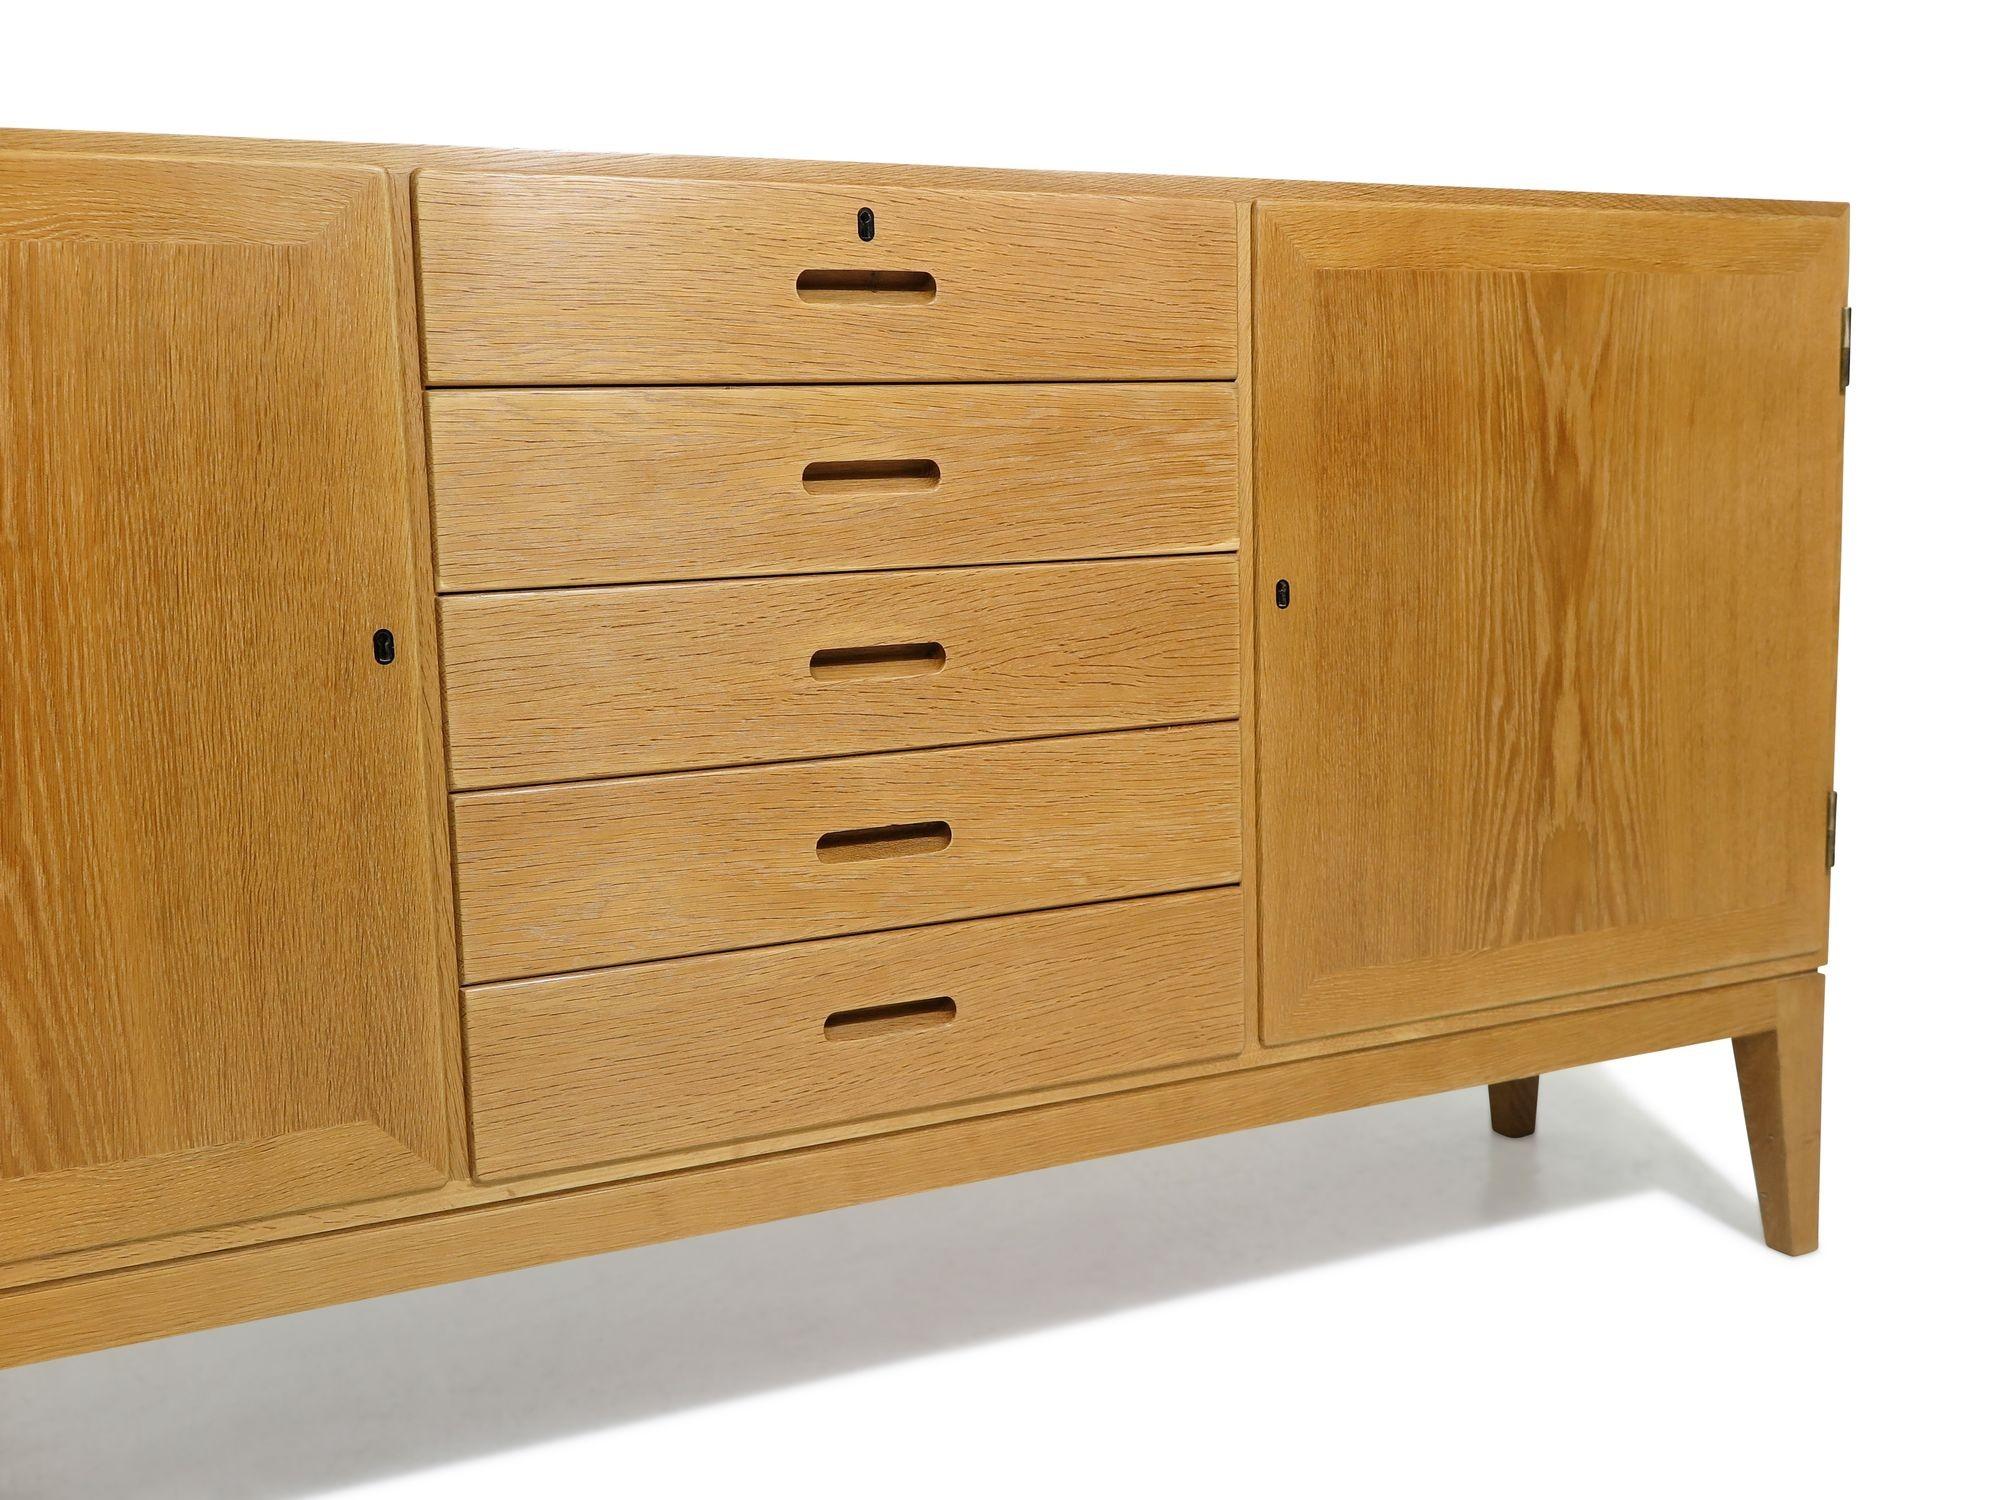 Mid-century Danish Oak credenza designed by Kai Winding in 1958, Denmark. This finely crafted cabinet showcases oak construction with mitered edges and recessed carved pulls. Features two locking doors and five drawers in the center, with an